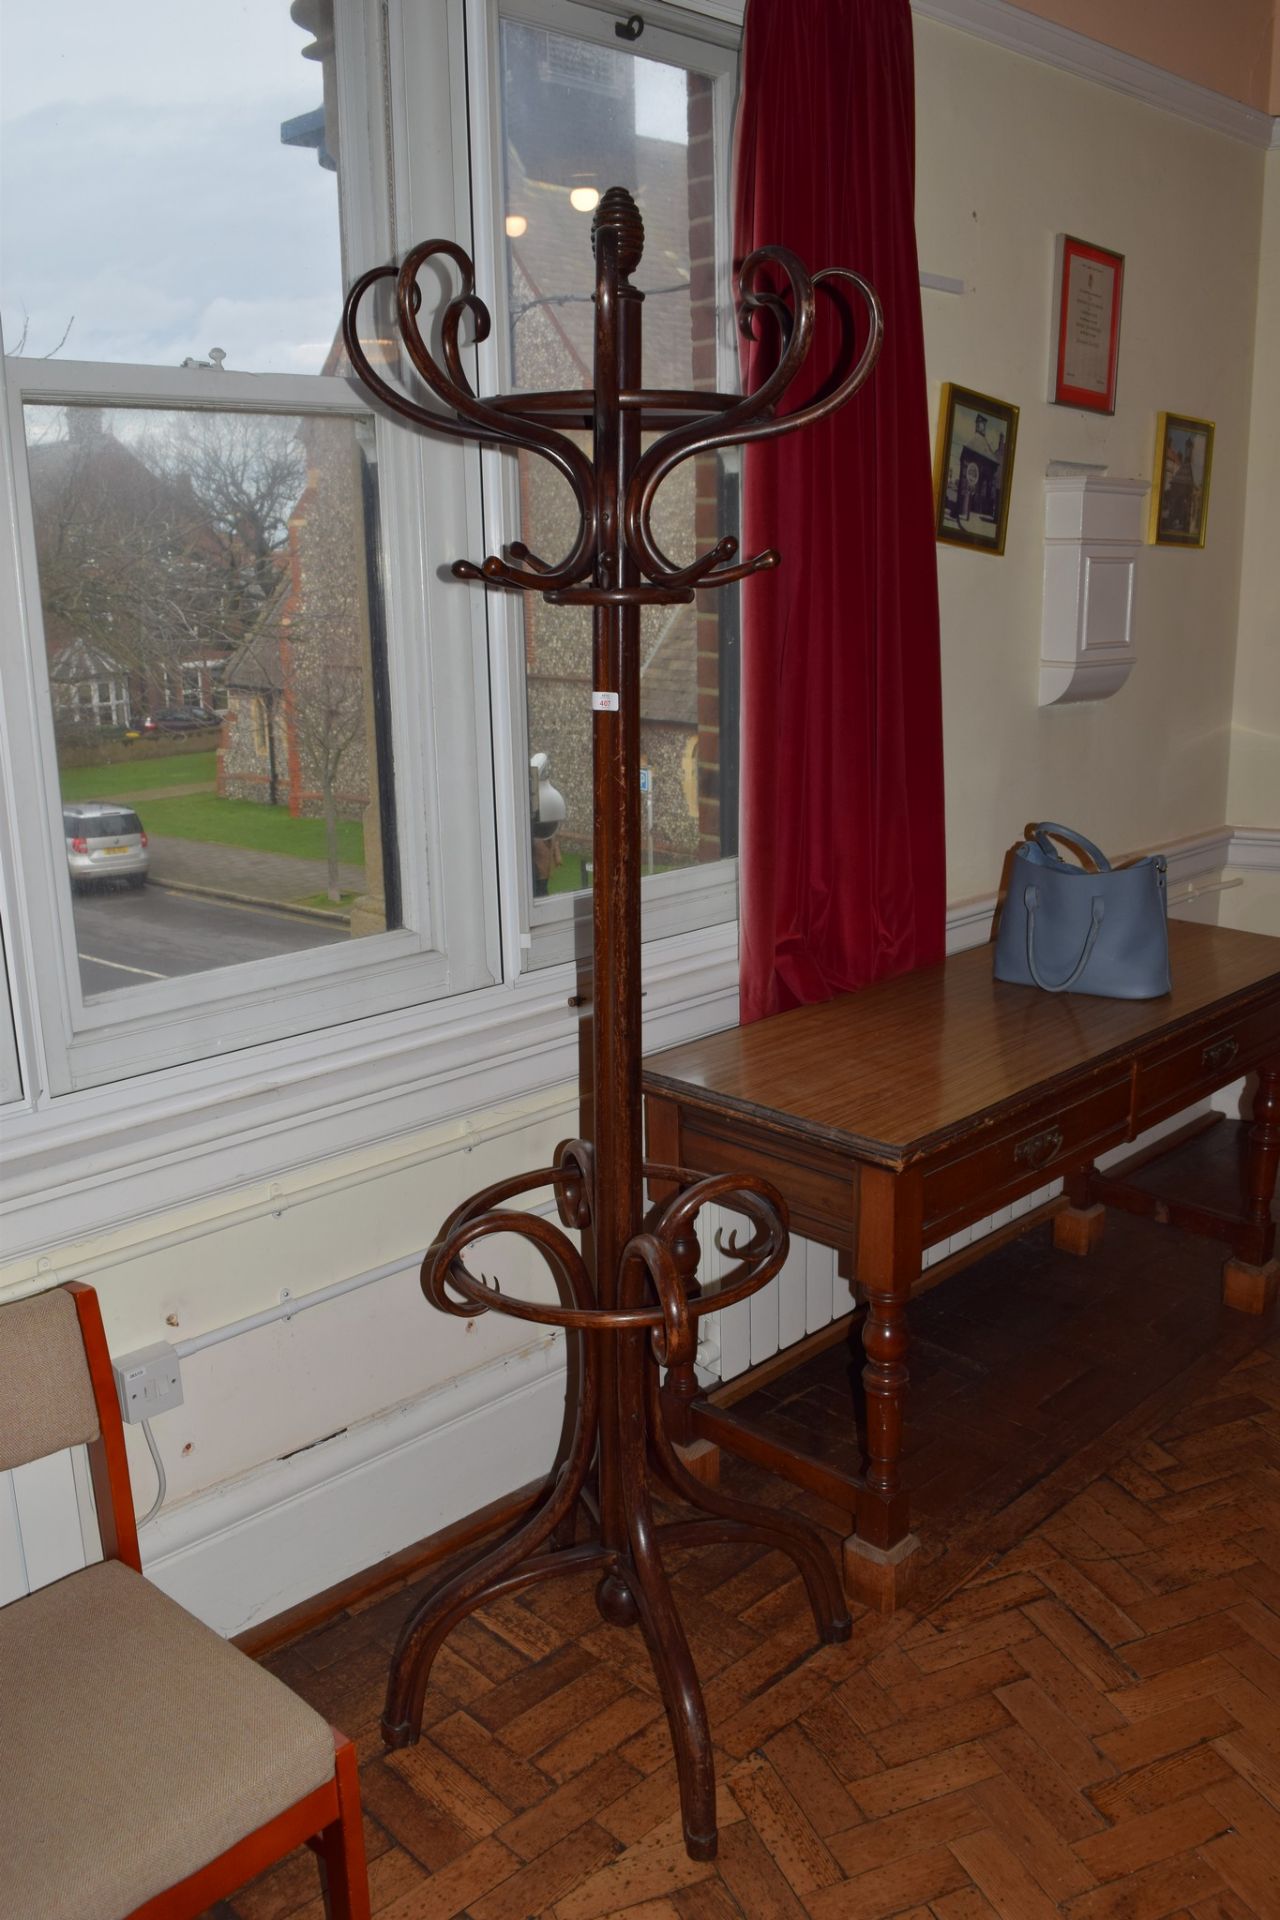 Early 20th century stained beech, bentwood hat/coat/umbrella stand (beehive finial)